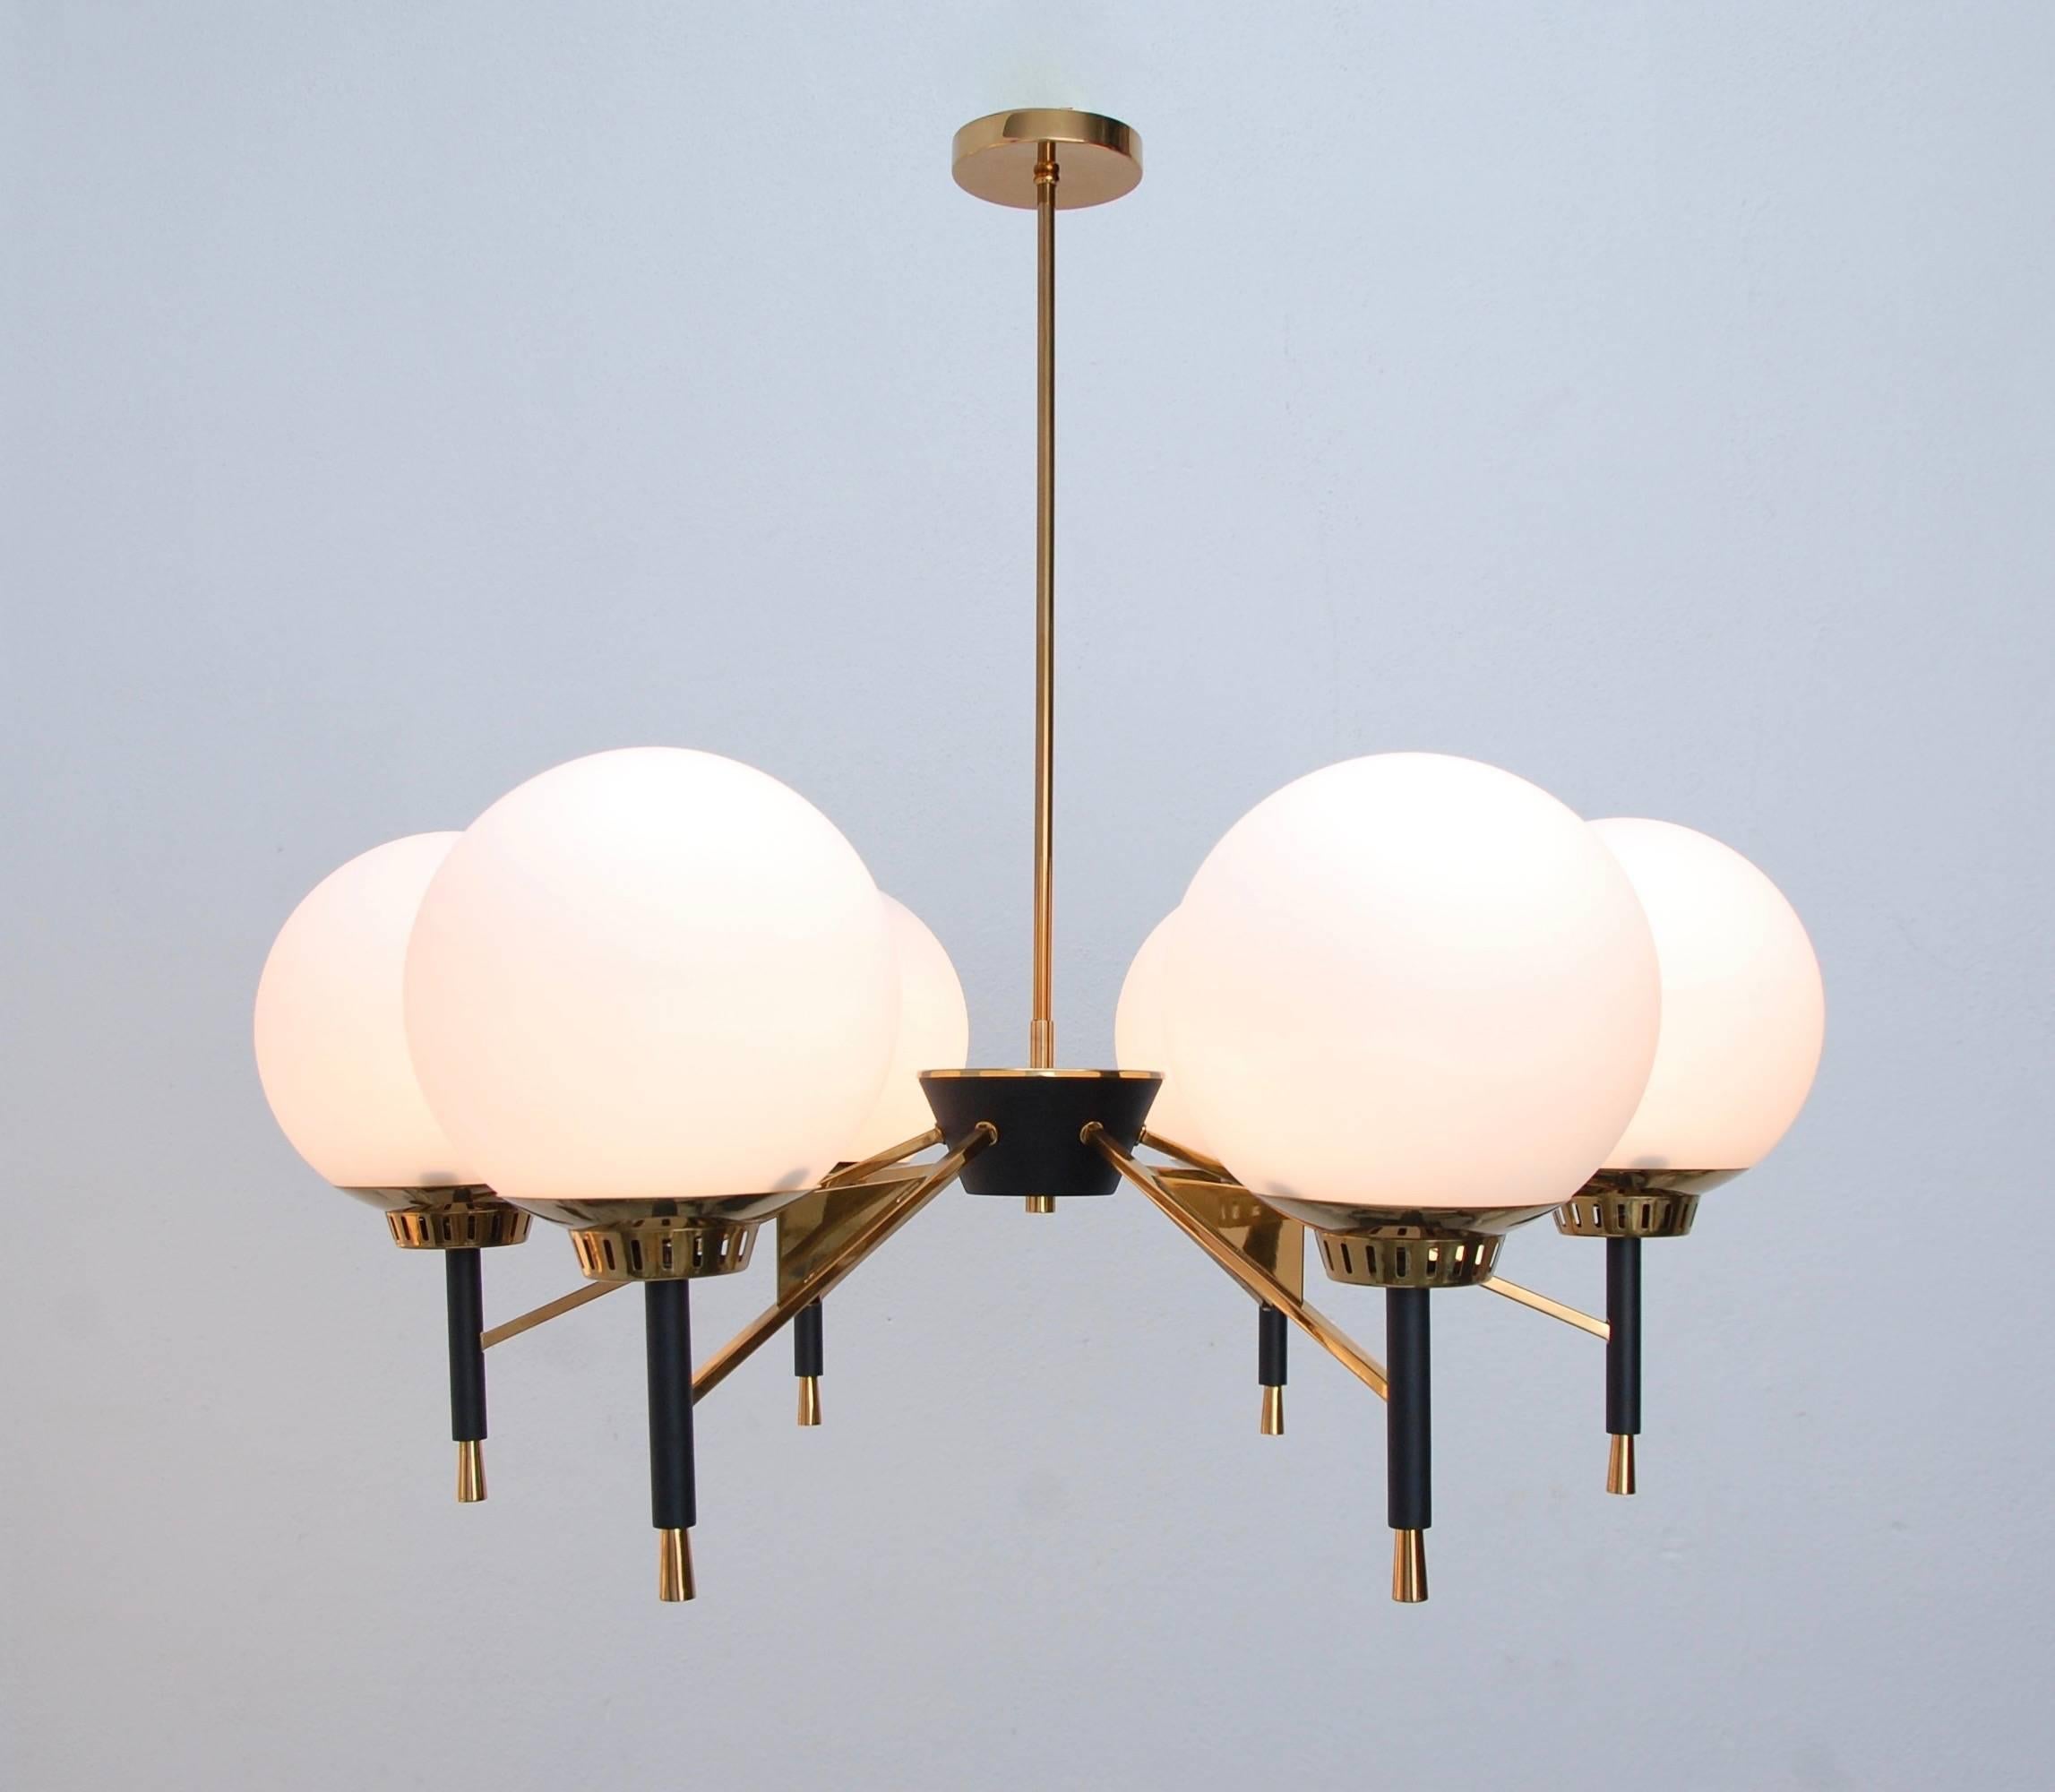 Six globe, brass and black blown glass-dining chandelier from 1950s, Italy. Medium based sockets.